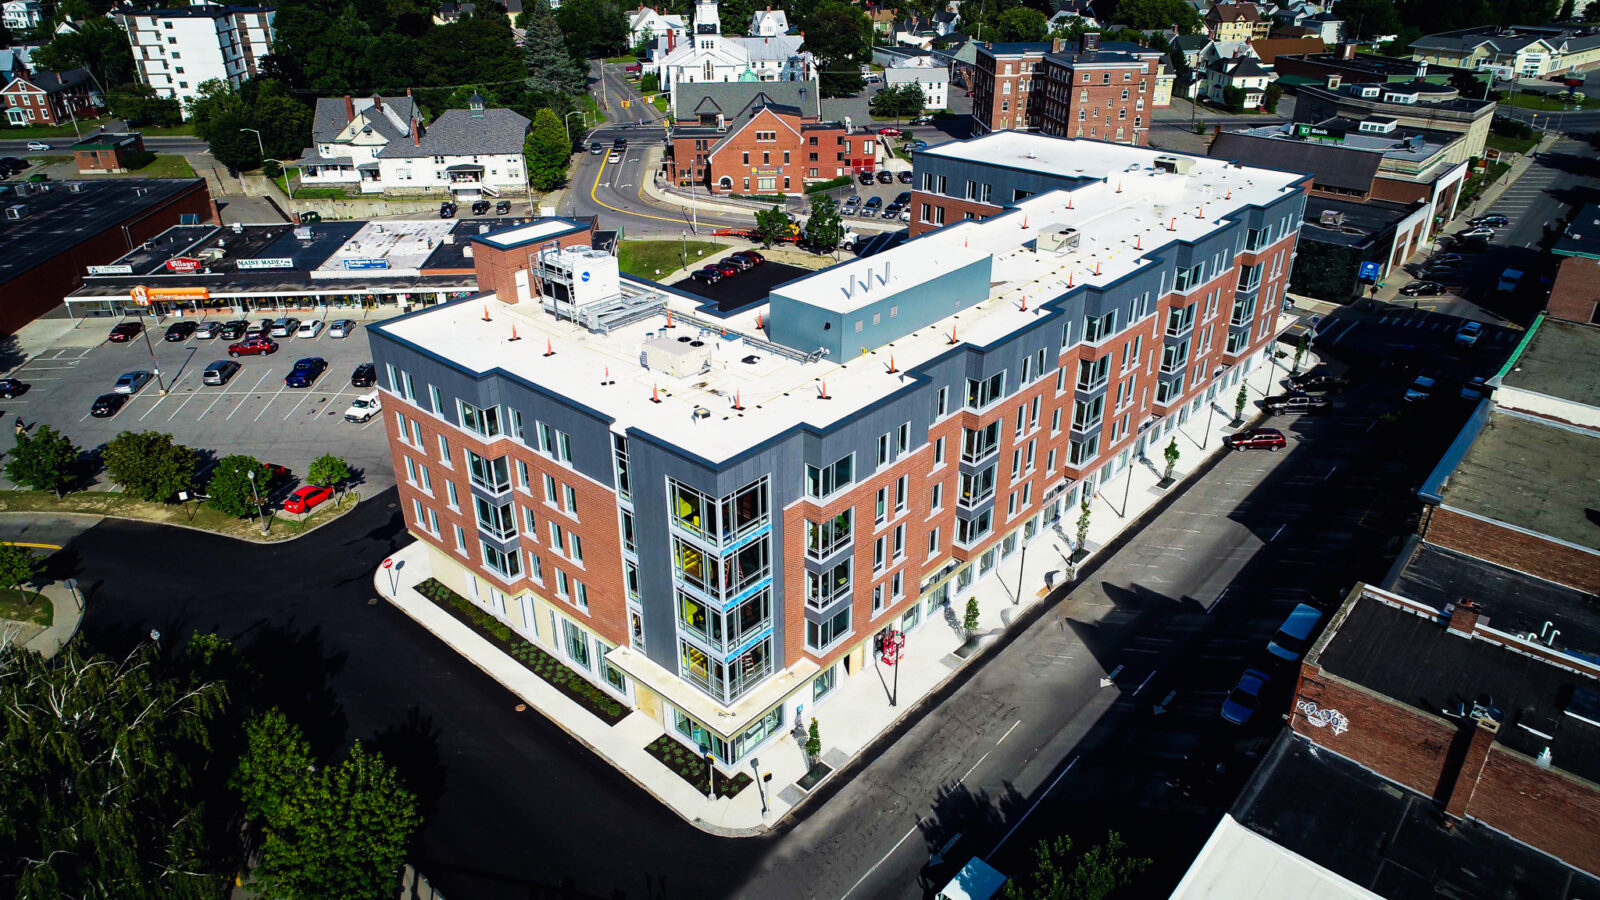 Angled aerial view of the Colby College brick dorms